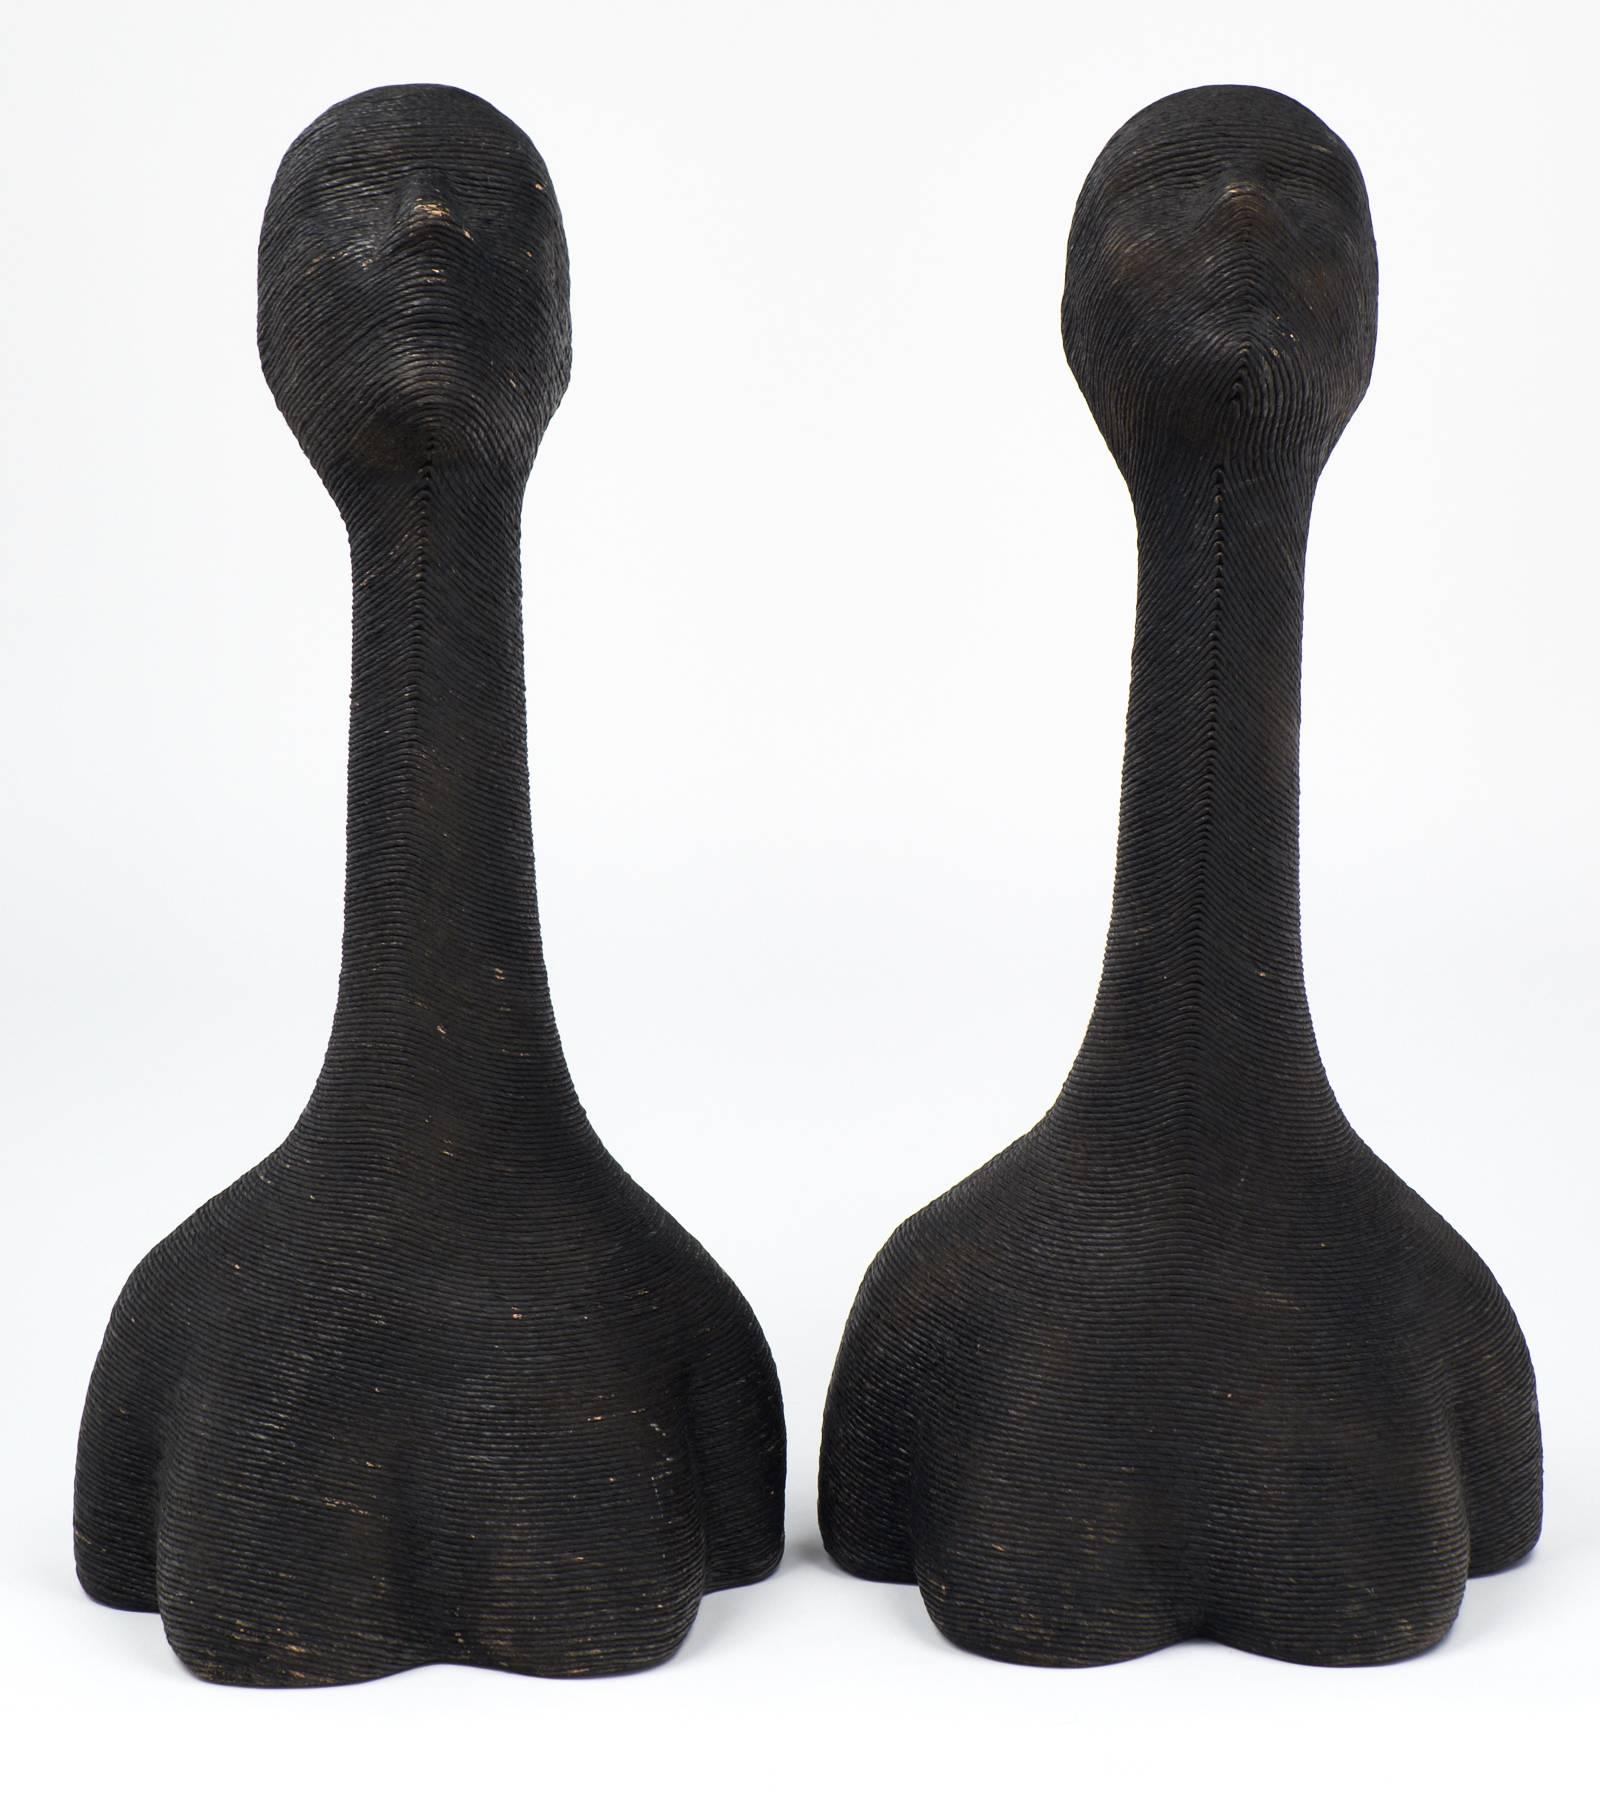 Vintage pair of French hat mannequins, very elegant with long necks, wrapped in black raffia for an intriguing texture on these interesting conversation pieces.